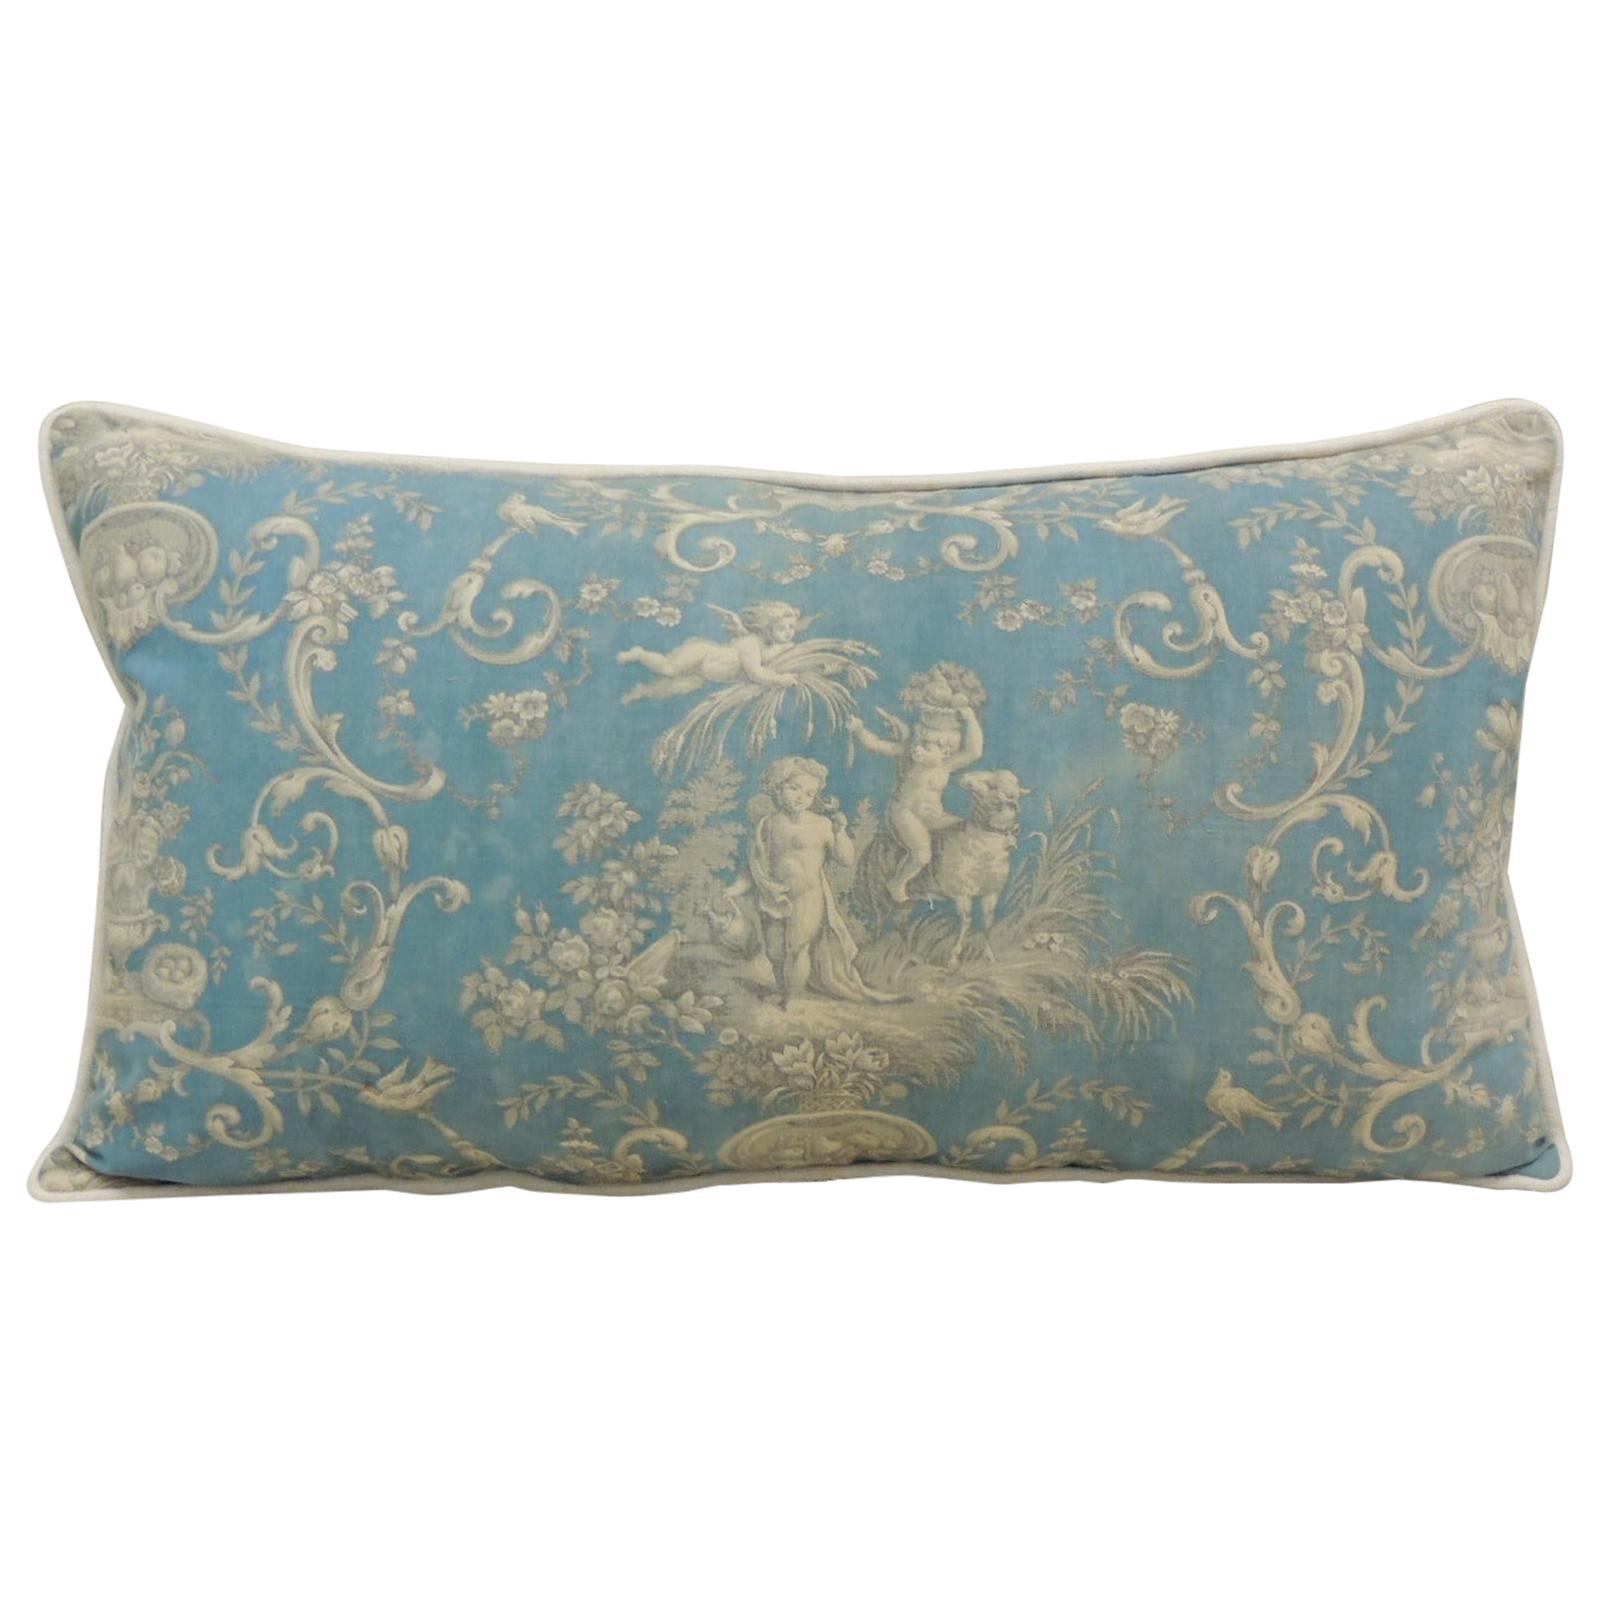 Antique Powder Blue and Natural Printed Toile Bolster Decorative Pillow